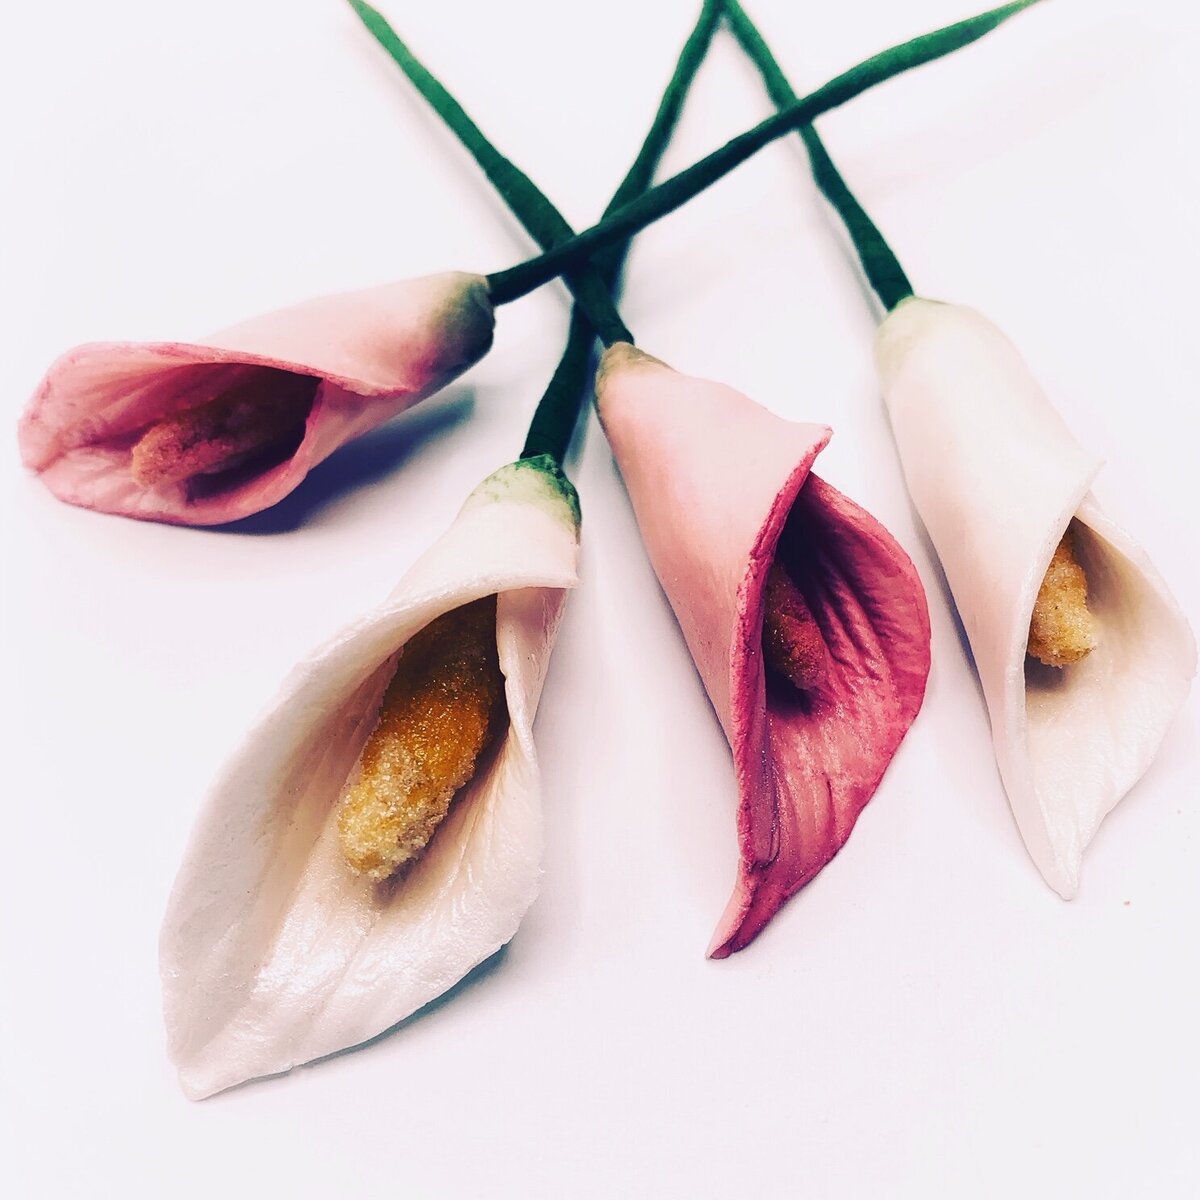 Calla lily sugar flowers in pink and ivory